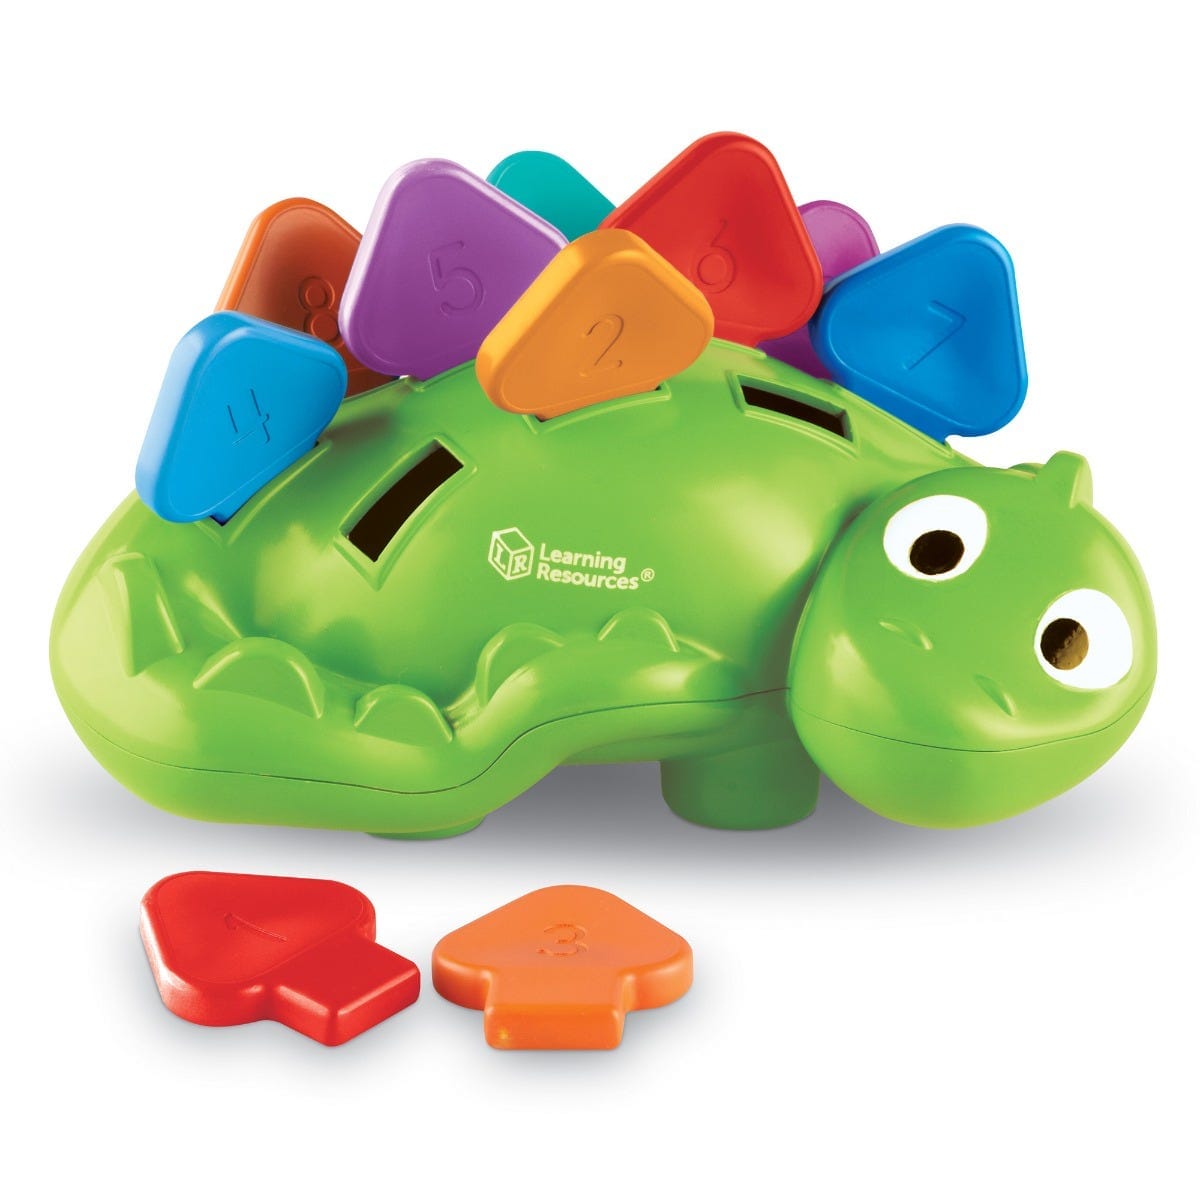 Learning Resources-Steggy the Fine Motor Dino-LER9091-Legacy Toys